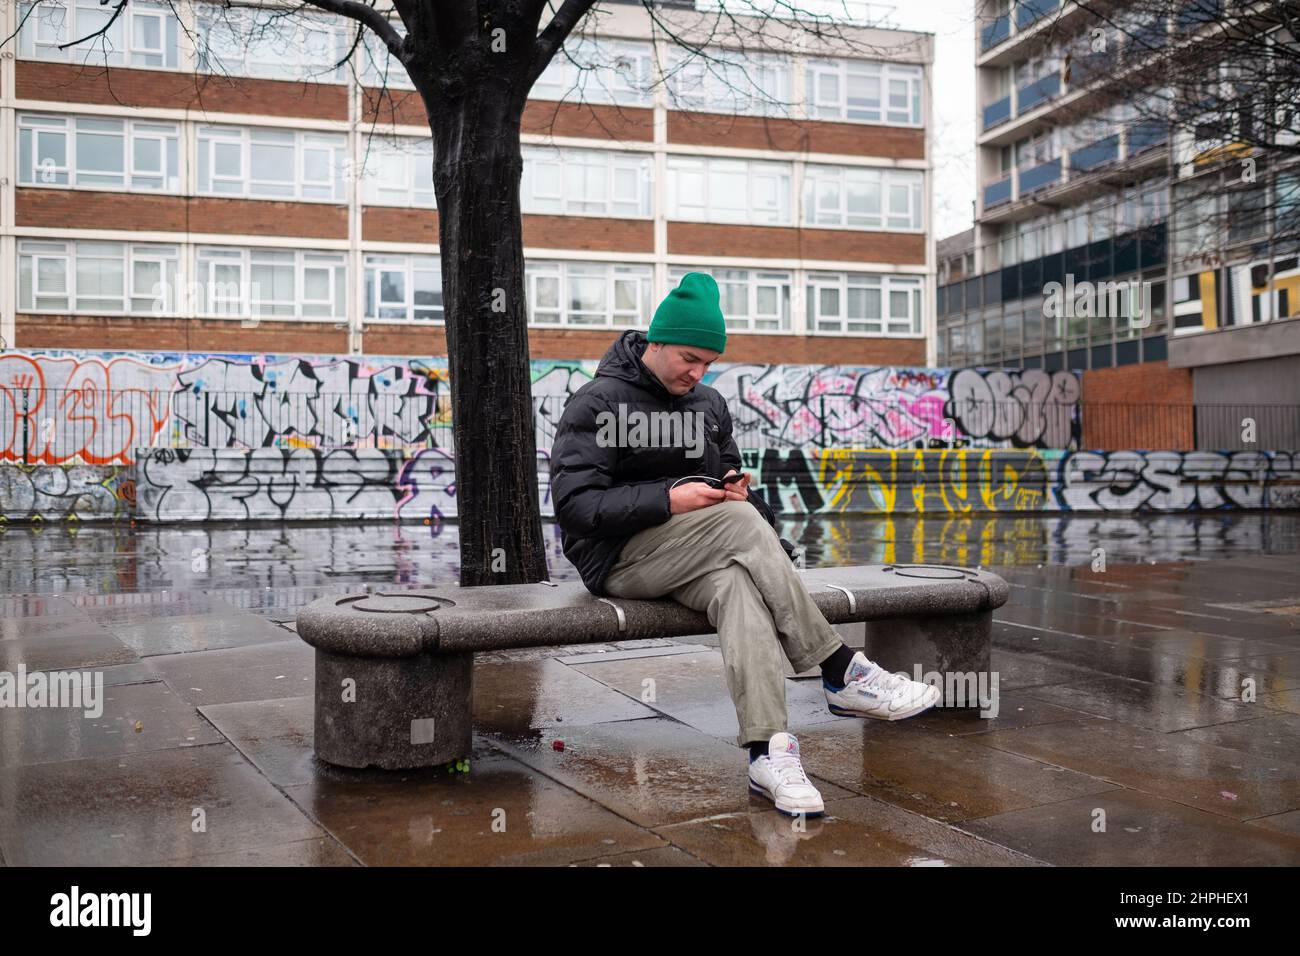 Some peace and quiet on a wet bench in Old Street, London UK. Stock Photo